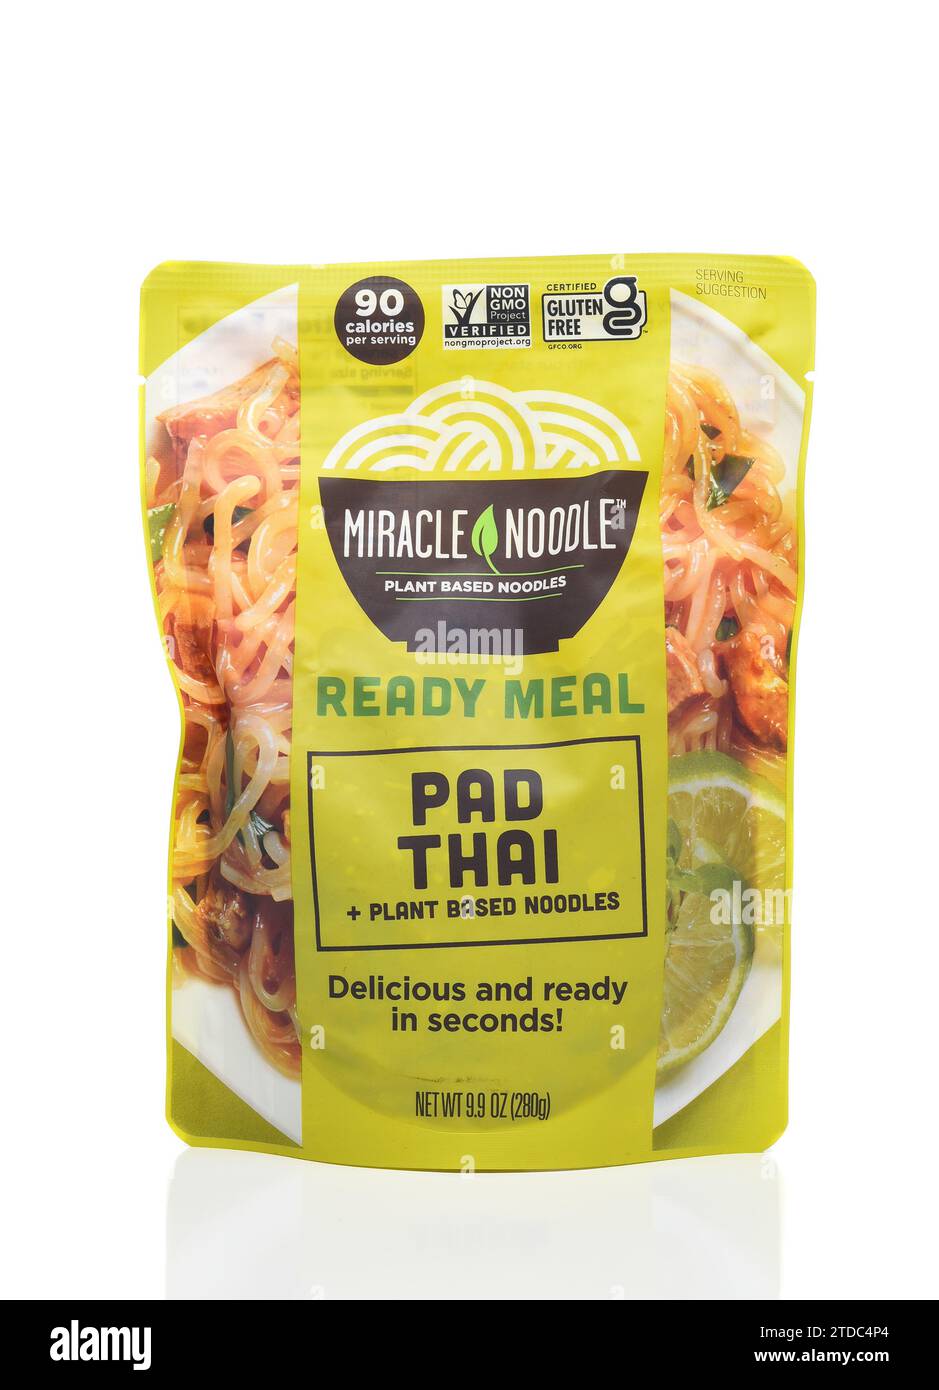 IRVINE, CALIFORNIA - 13 DEC 2023: A package of Miracle Noodle Pad Thai, made with plant based noodles. Stock Photo